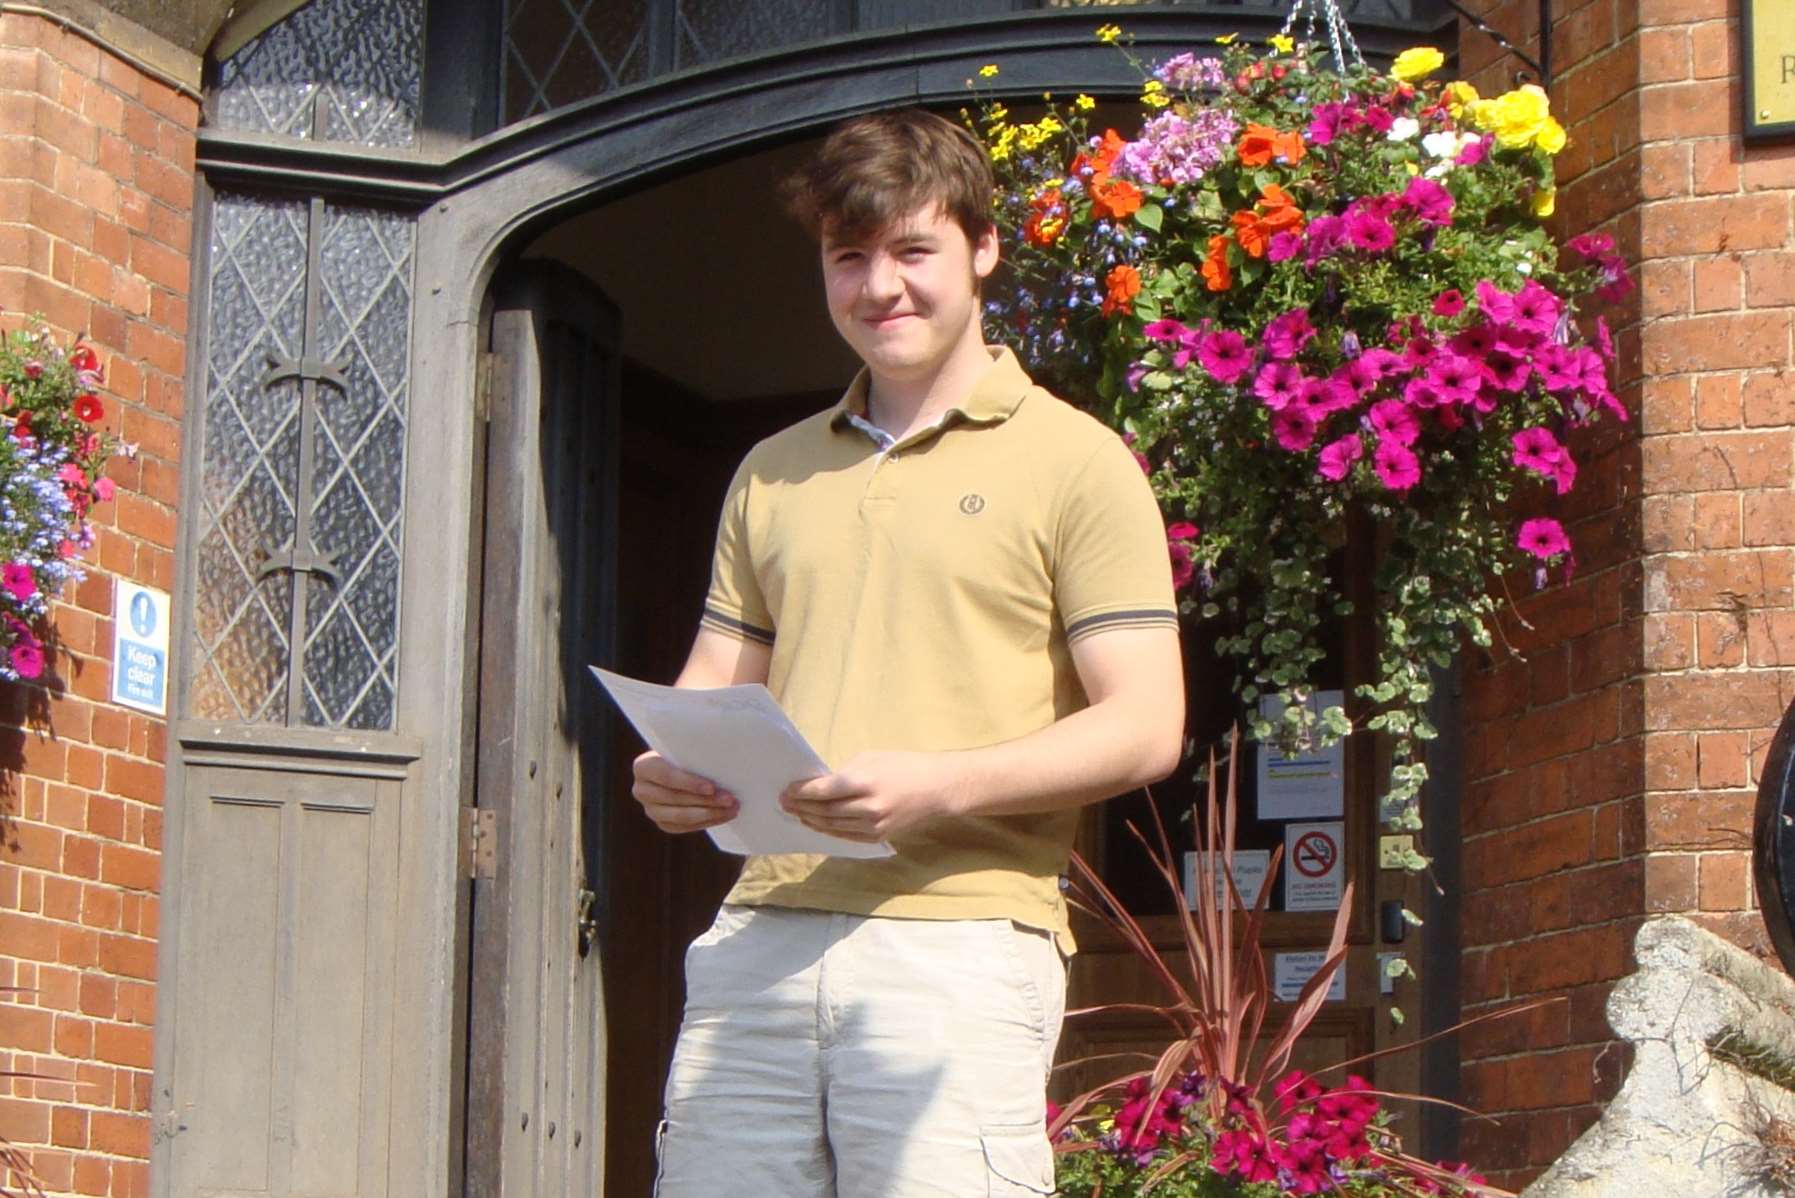 Christian Tofte from St Lawrence College is off to study Spanish and Czech at Oxford University